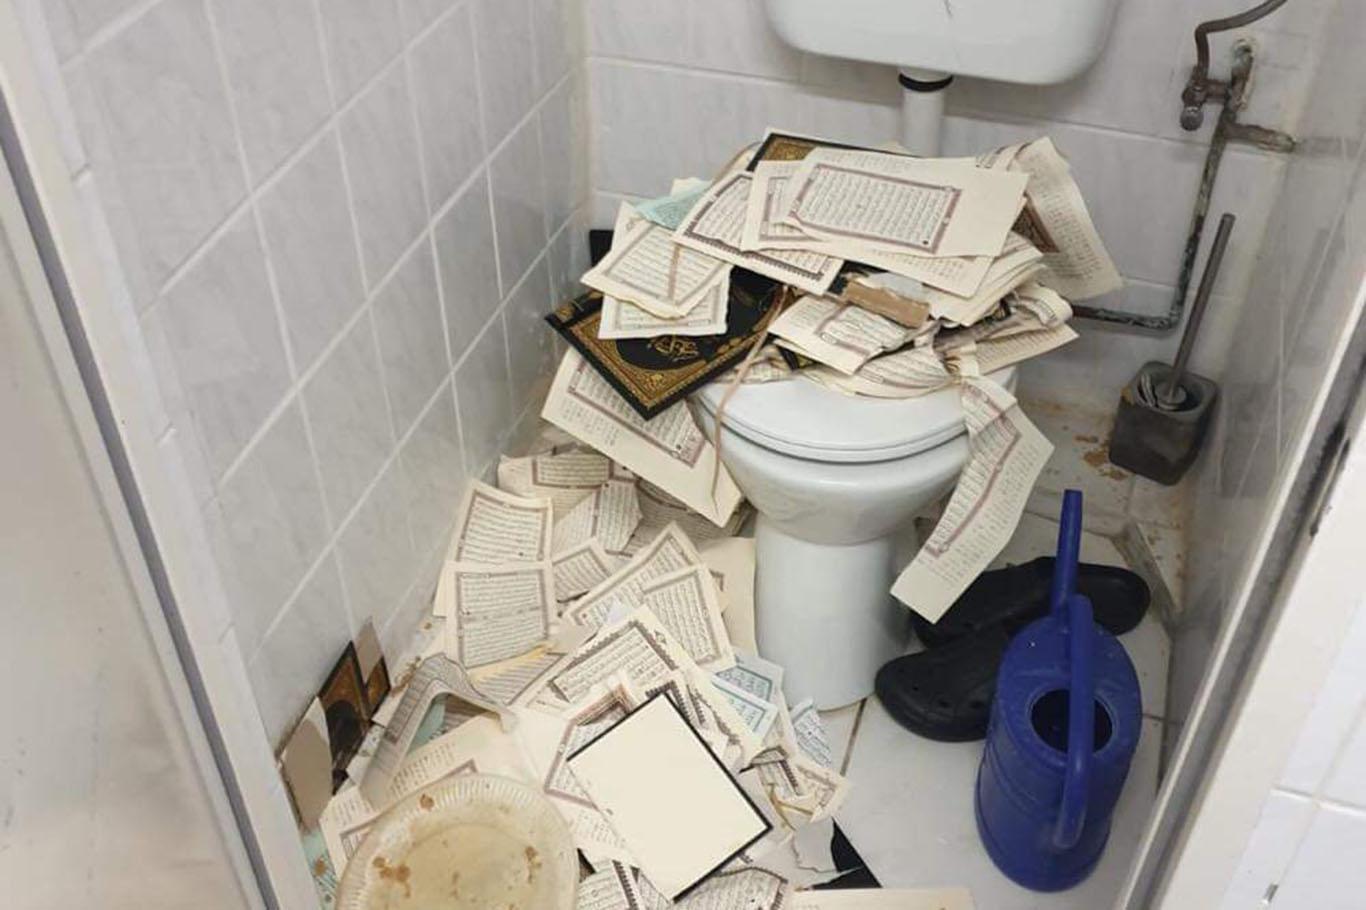 Scandalous event in Germany: they tear down the Qur'an and throw it to the toilet